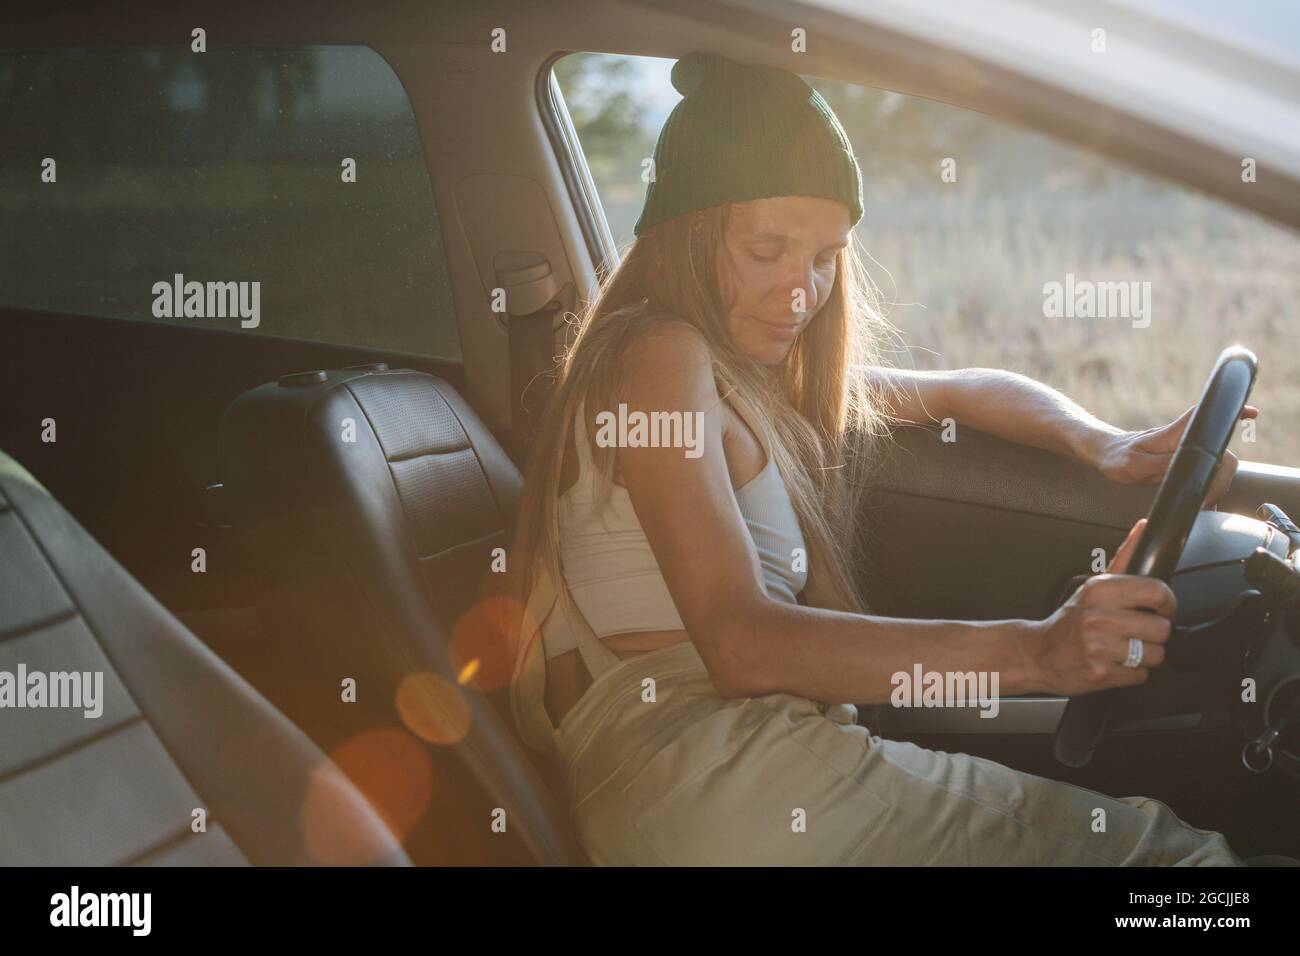 Tired woman in a watch cap napping in the car, leaning on window frame. Eyes closed. Stock Photo